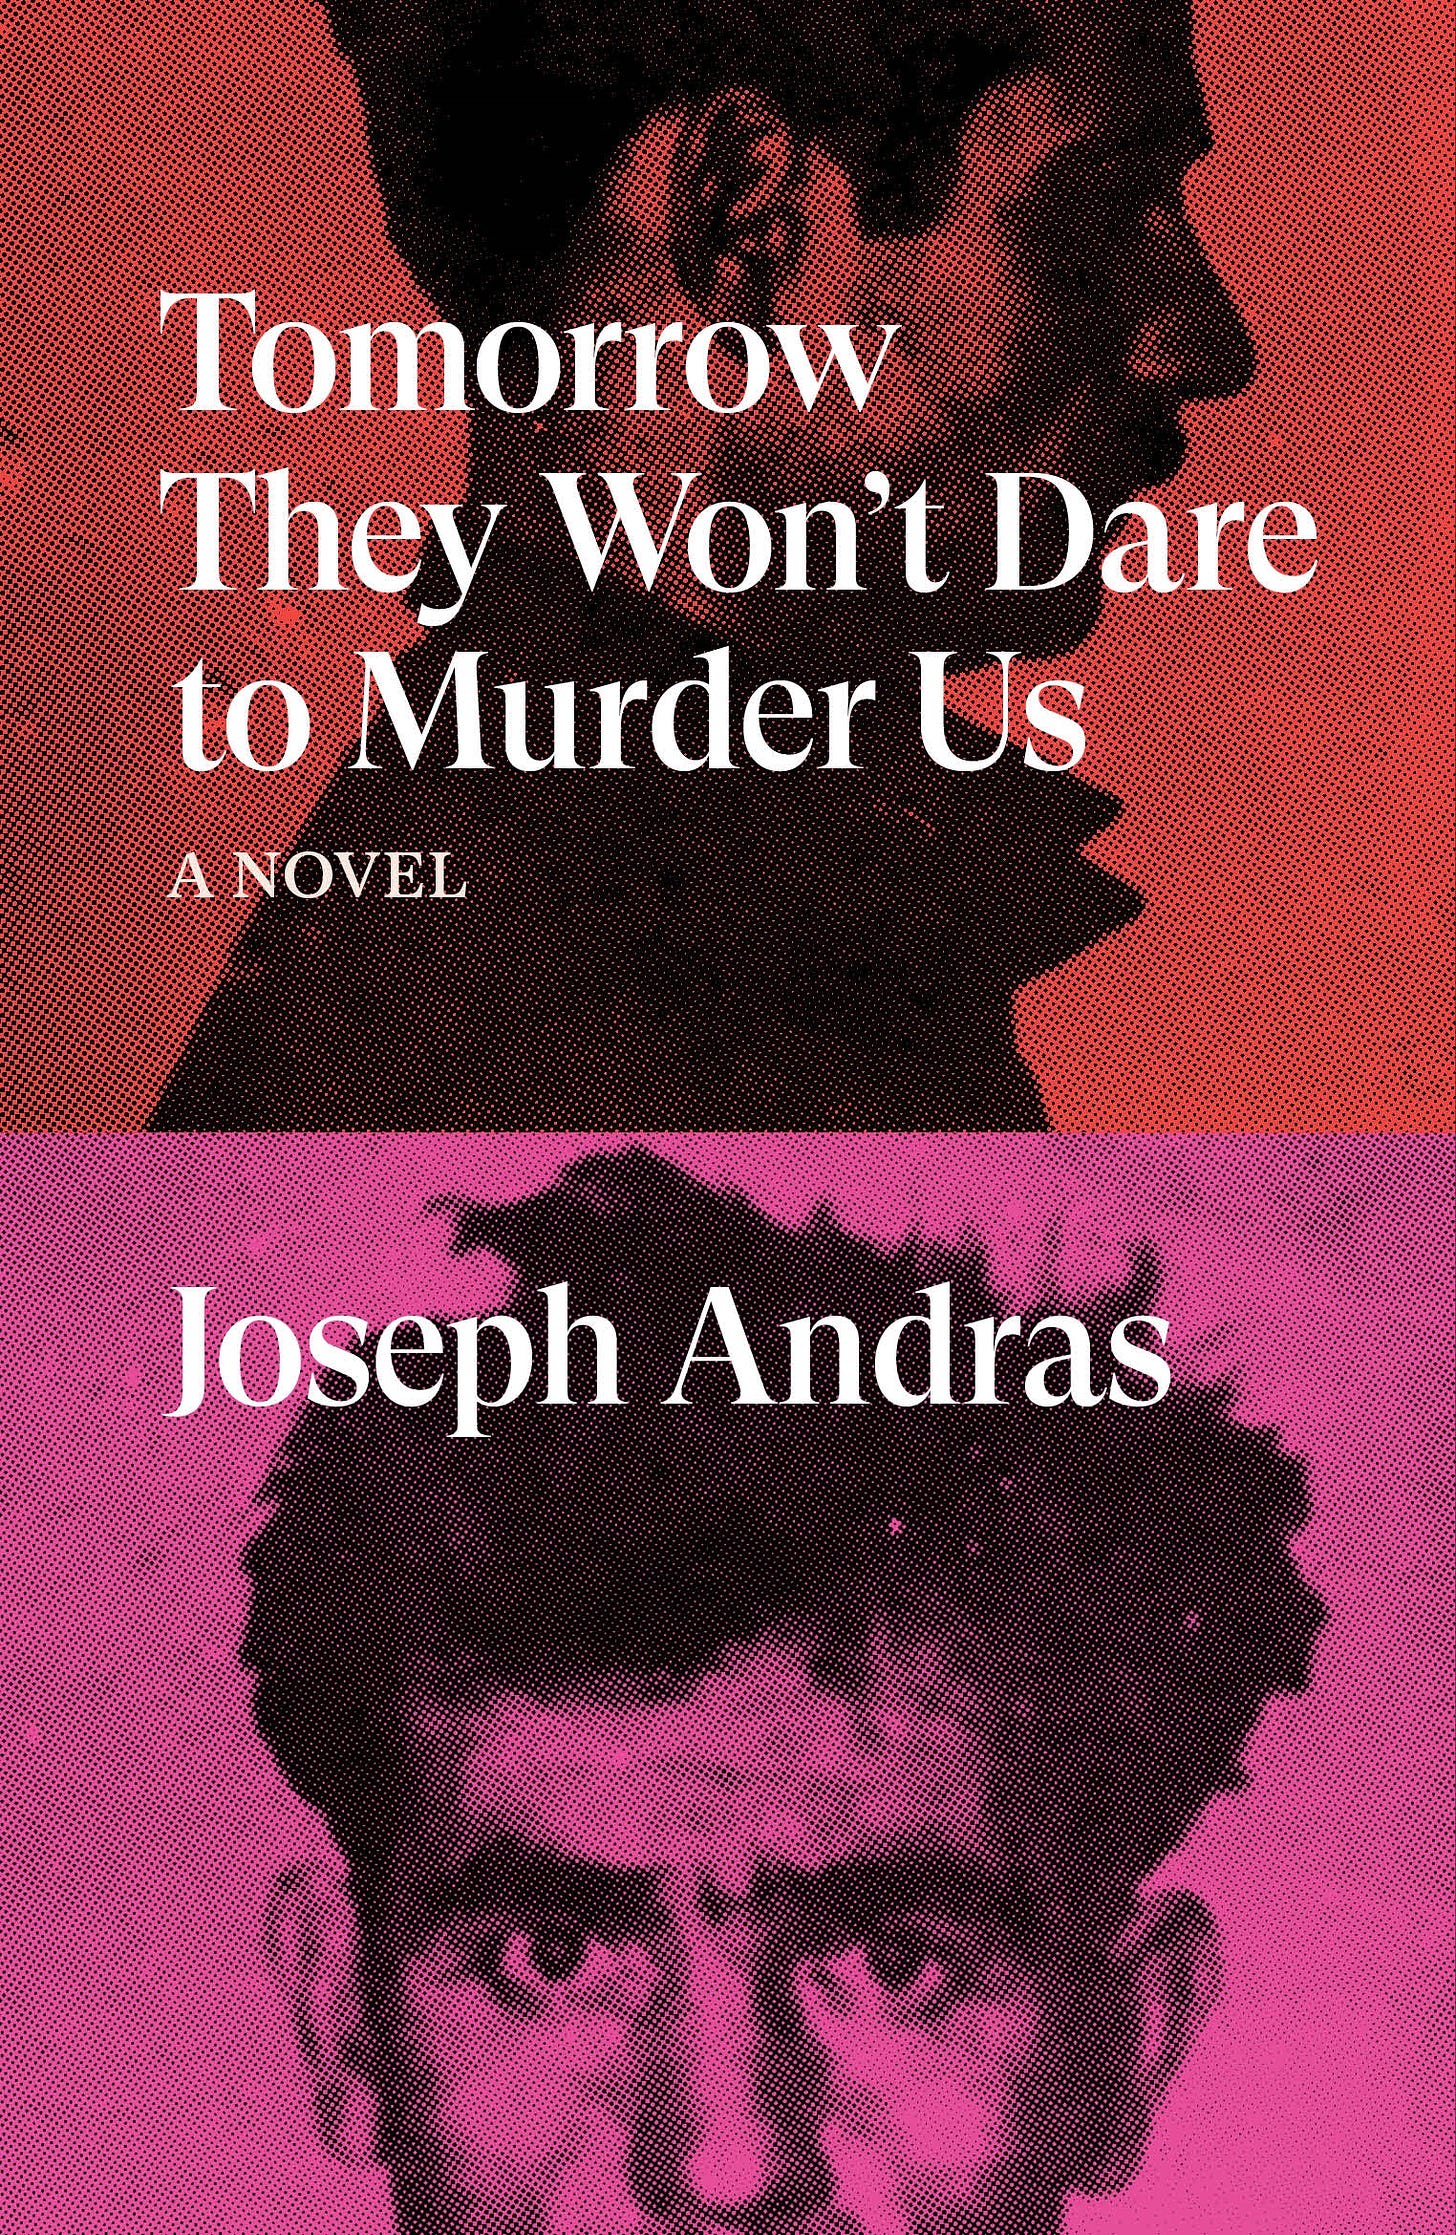 book cover: tomorrow they won't dare to murder us by joseph andras